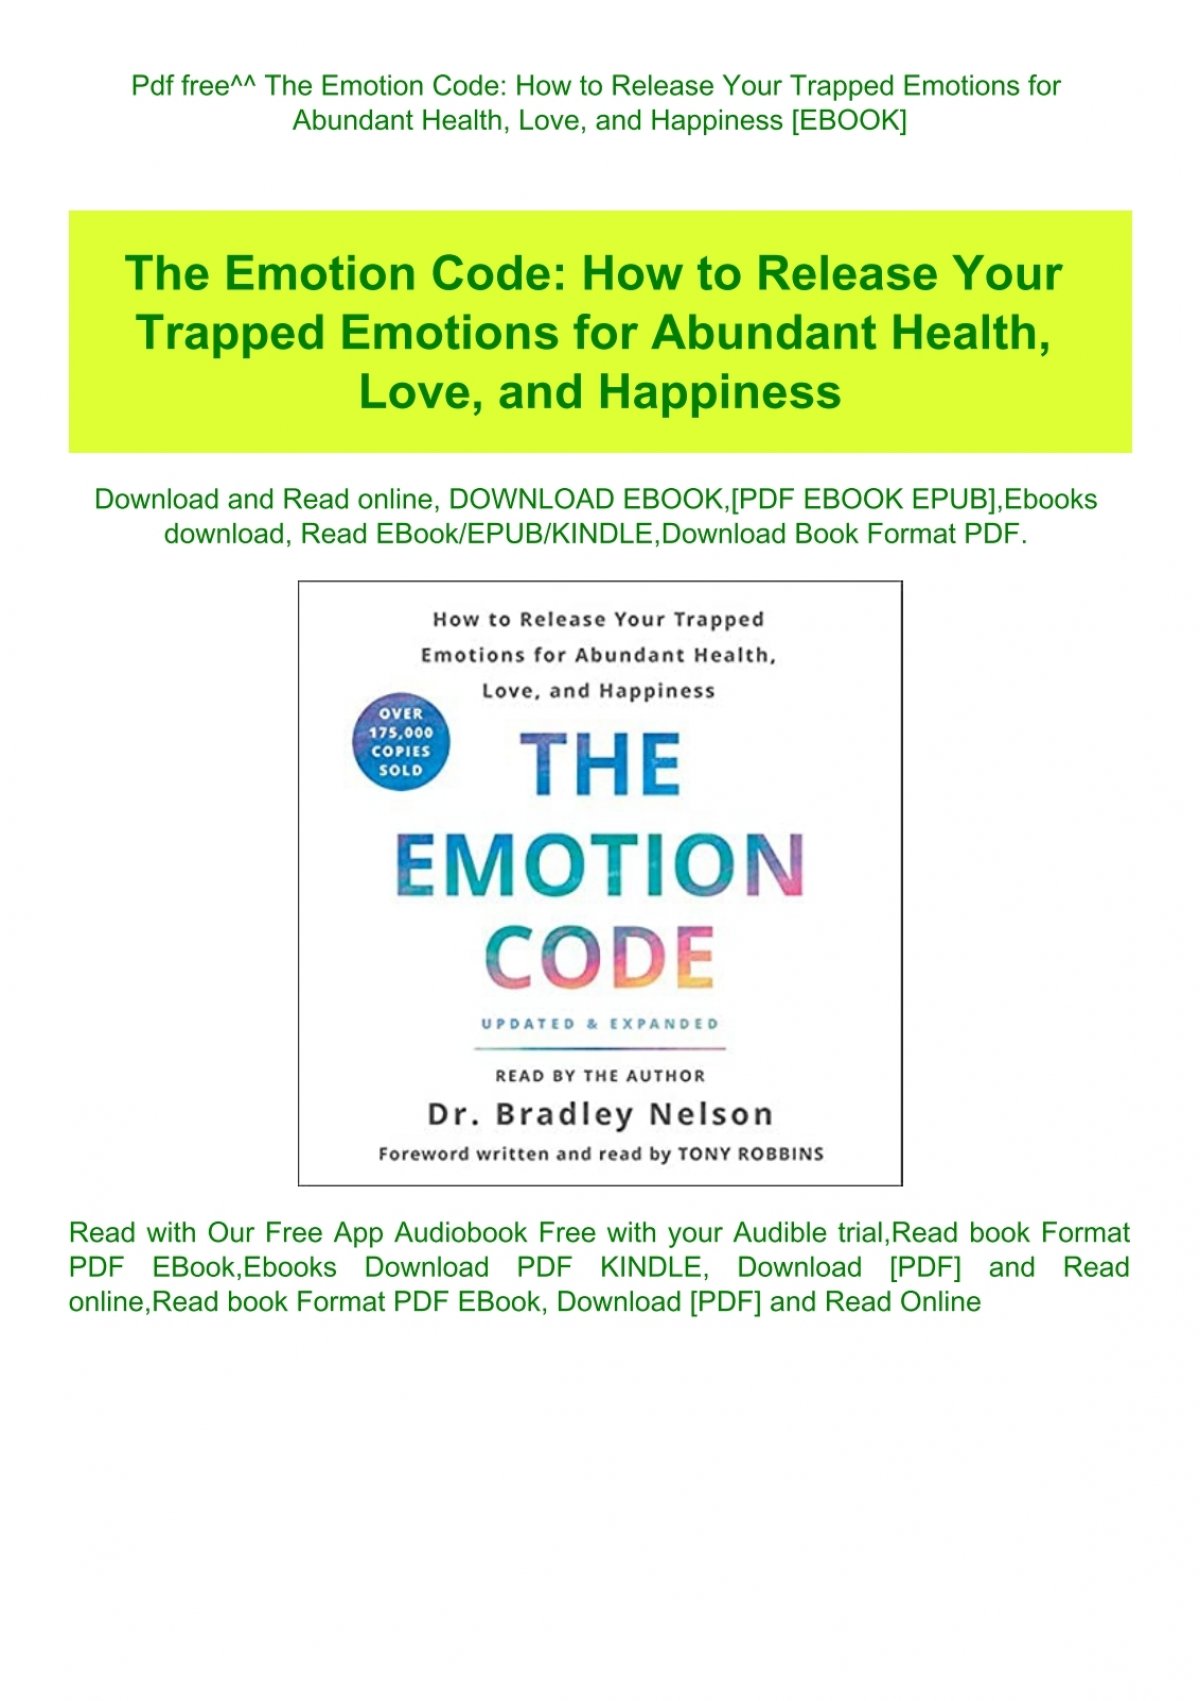 pdf-free-the-emotion-code-how-to-release-your-trapped-emotions-for